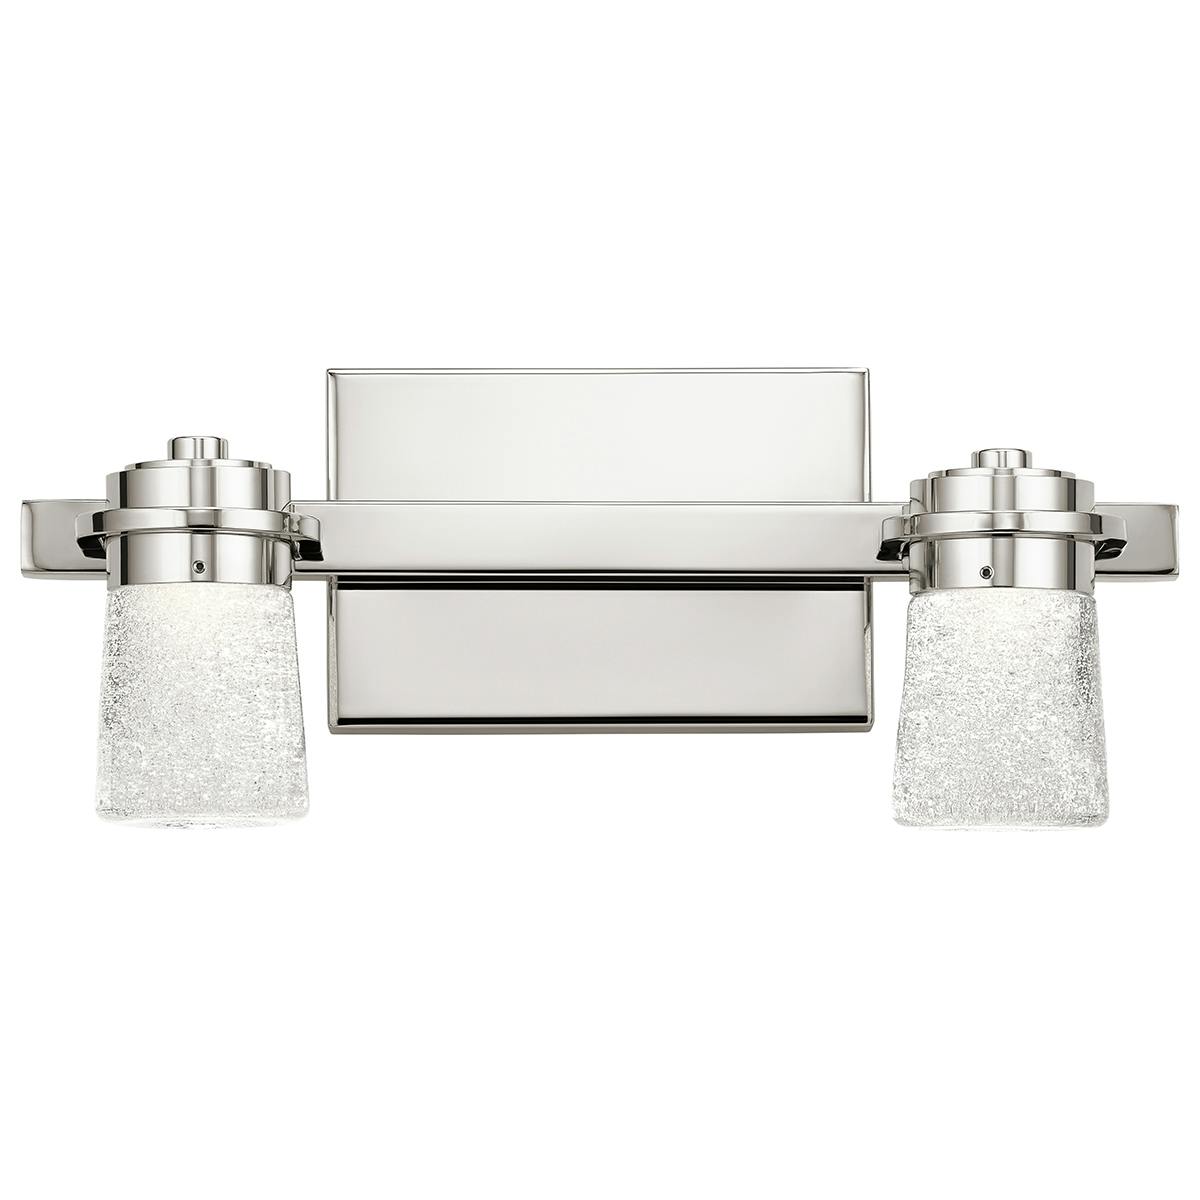 Front view of the Vada 3000K 2 Light Vanity Light Nickel on a white background